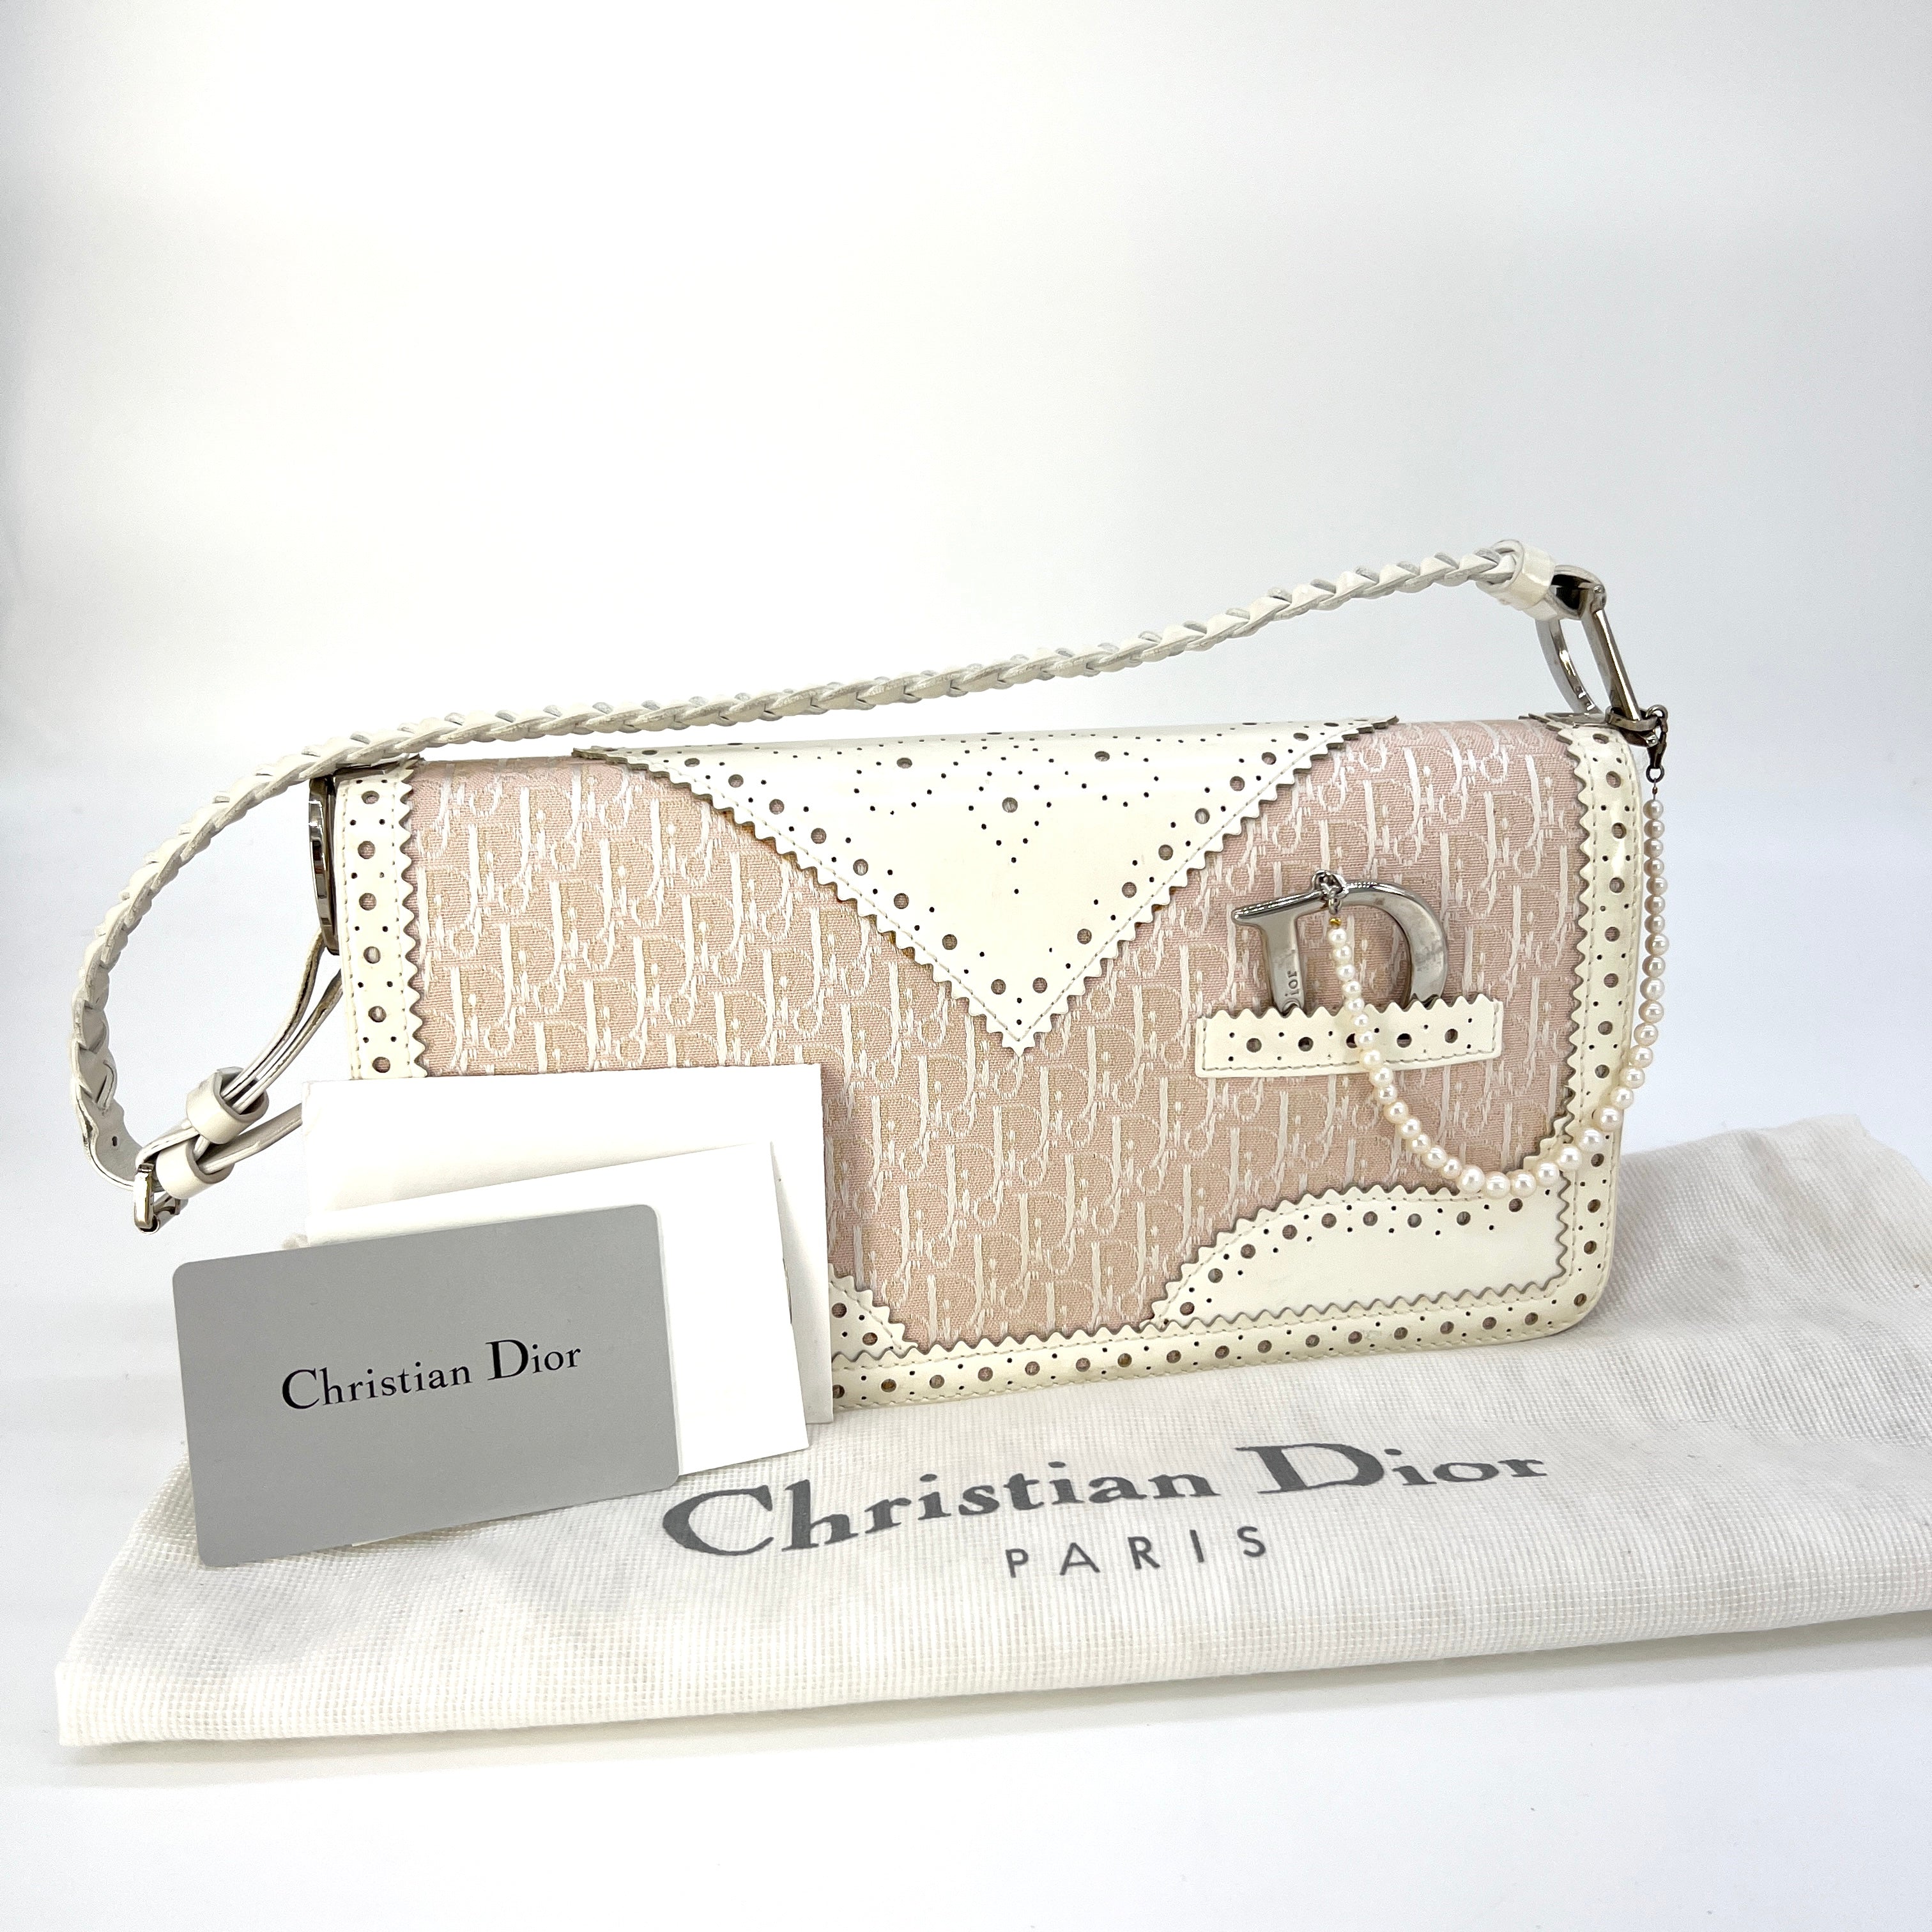 CHRISTIAN DIOR D'Trick Zip Shoulder Bag Leather with Diorissimo Canvas Rose Clair [Guaranteed Authentic]